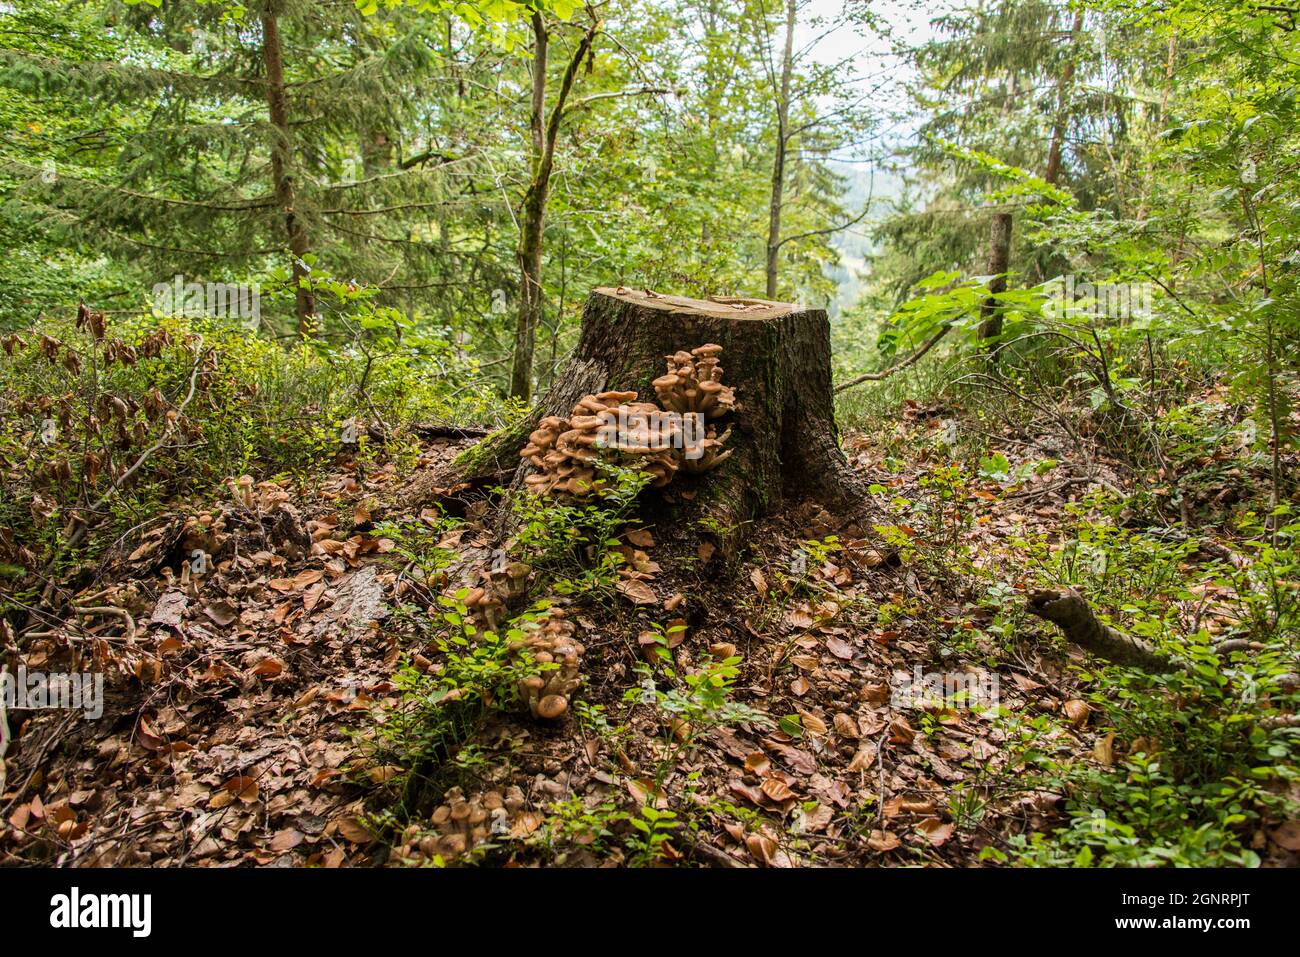 A wooden stump overgrown with fungi in a Bavarian forest Stock Photo